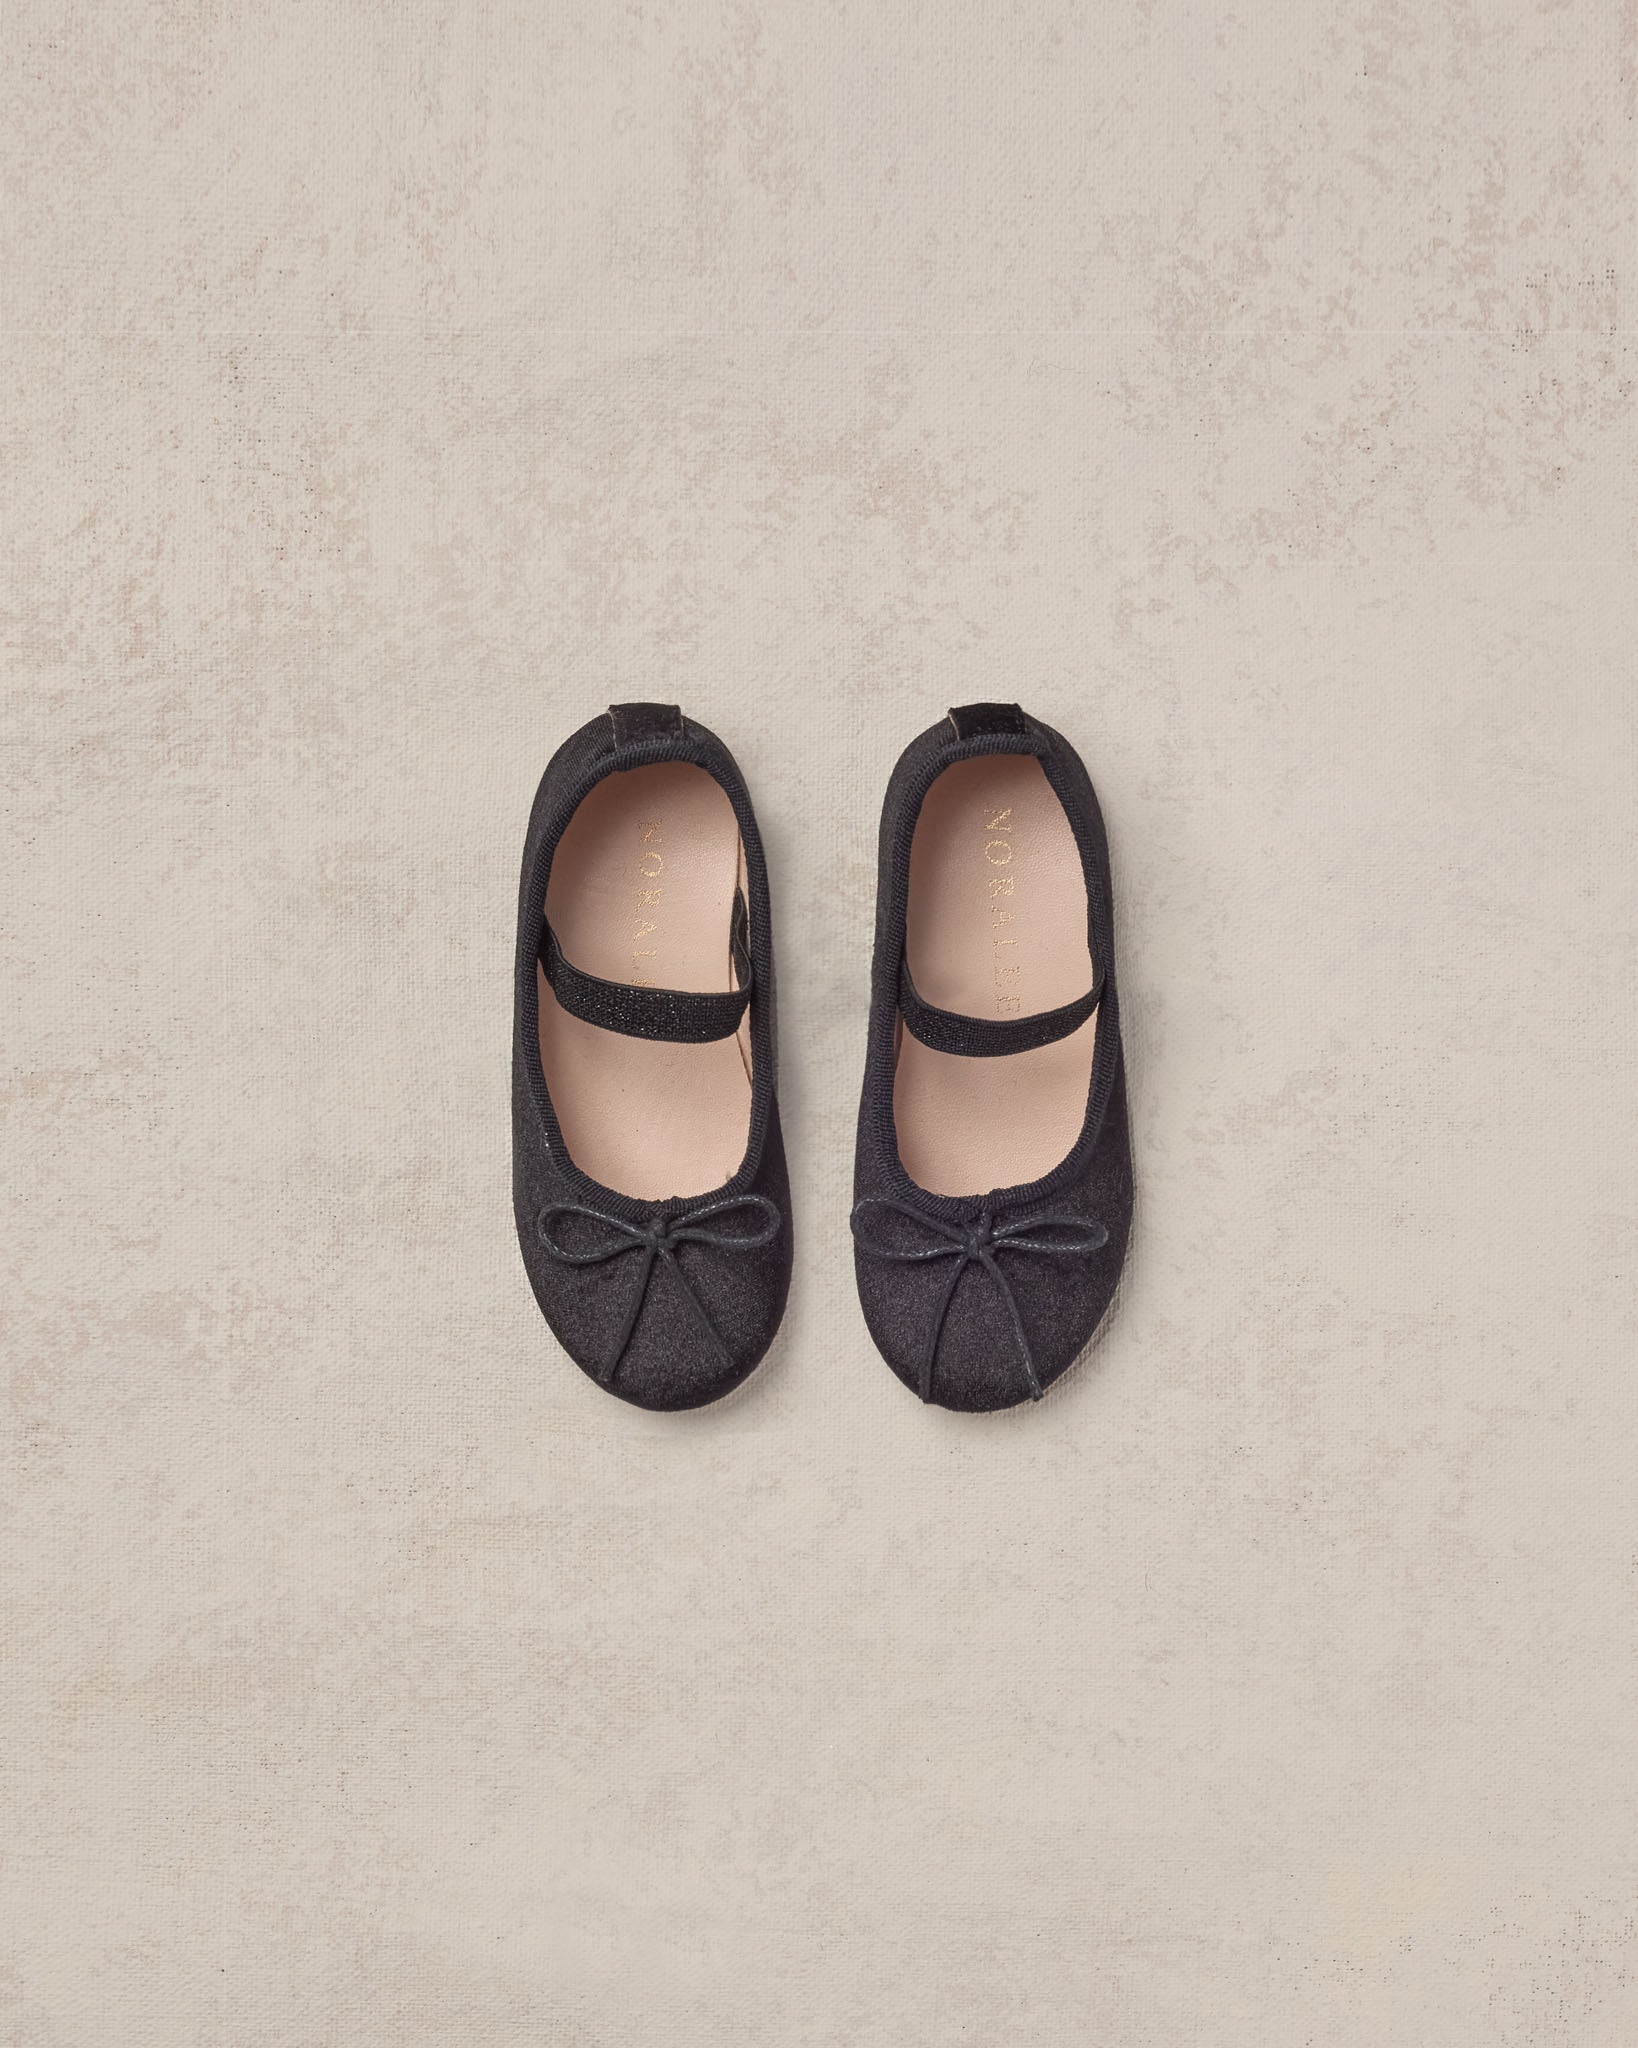 Ballet Flats || Black - Rylee + Cru | Kids Clothes | Trendy Baby Clothes | Modern Infant Outfits |